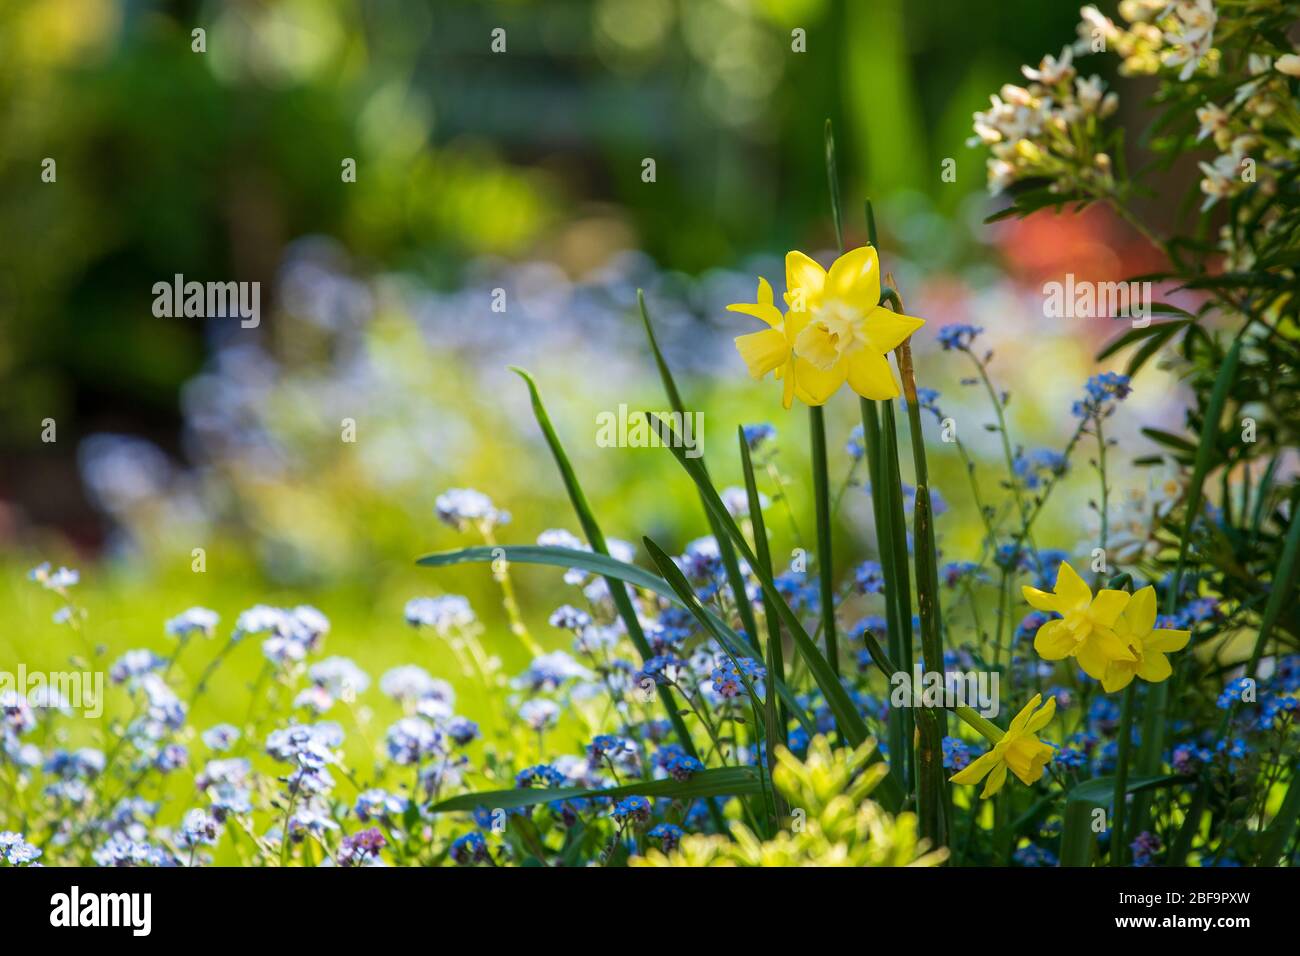 Narcissi and forget-me-nots (Myosotis) in a sunny spring garden with blurry background Stock Photo